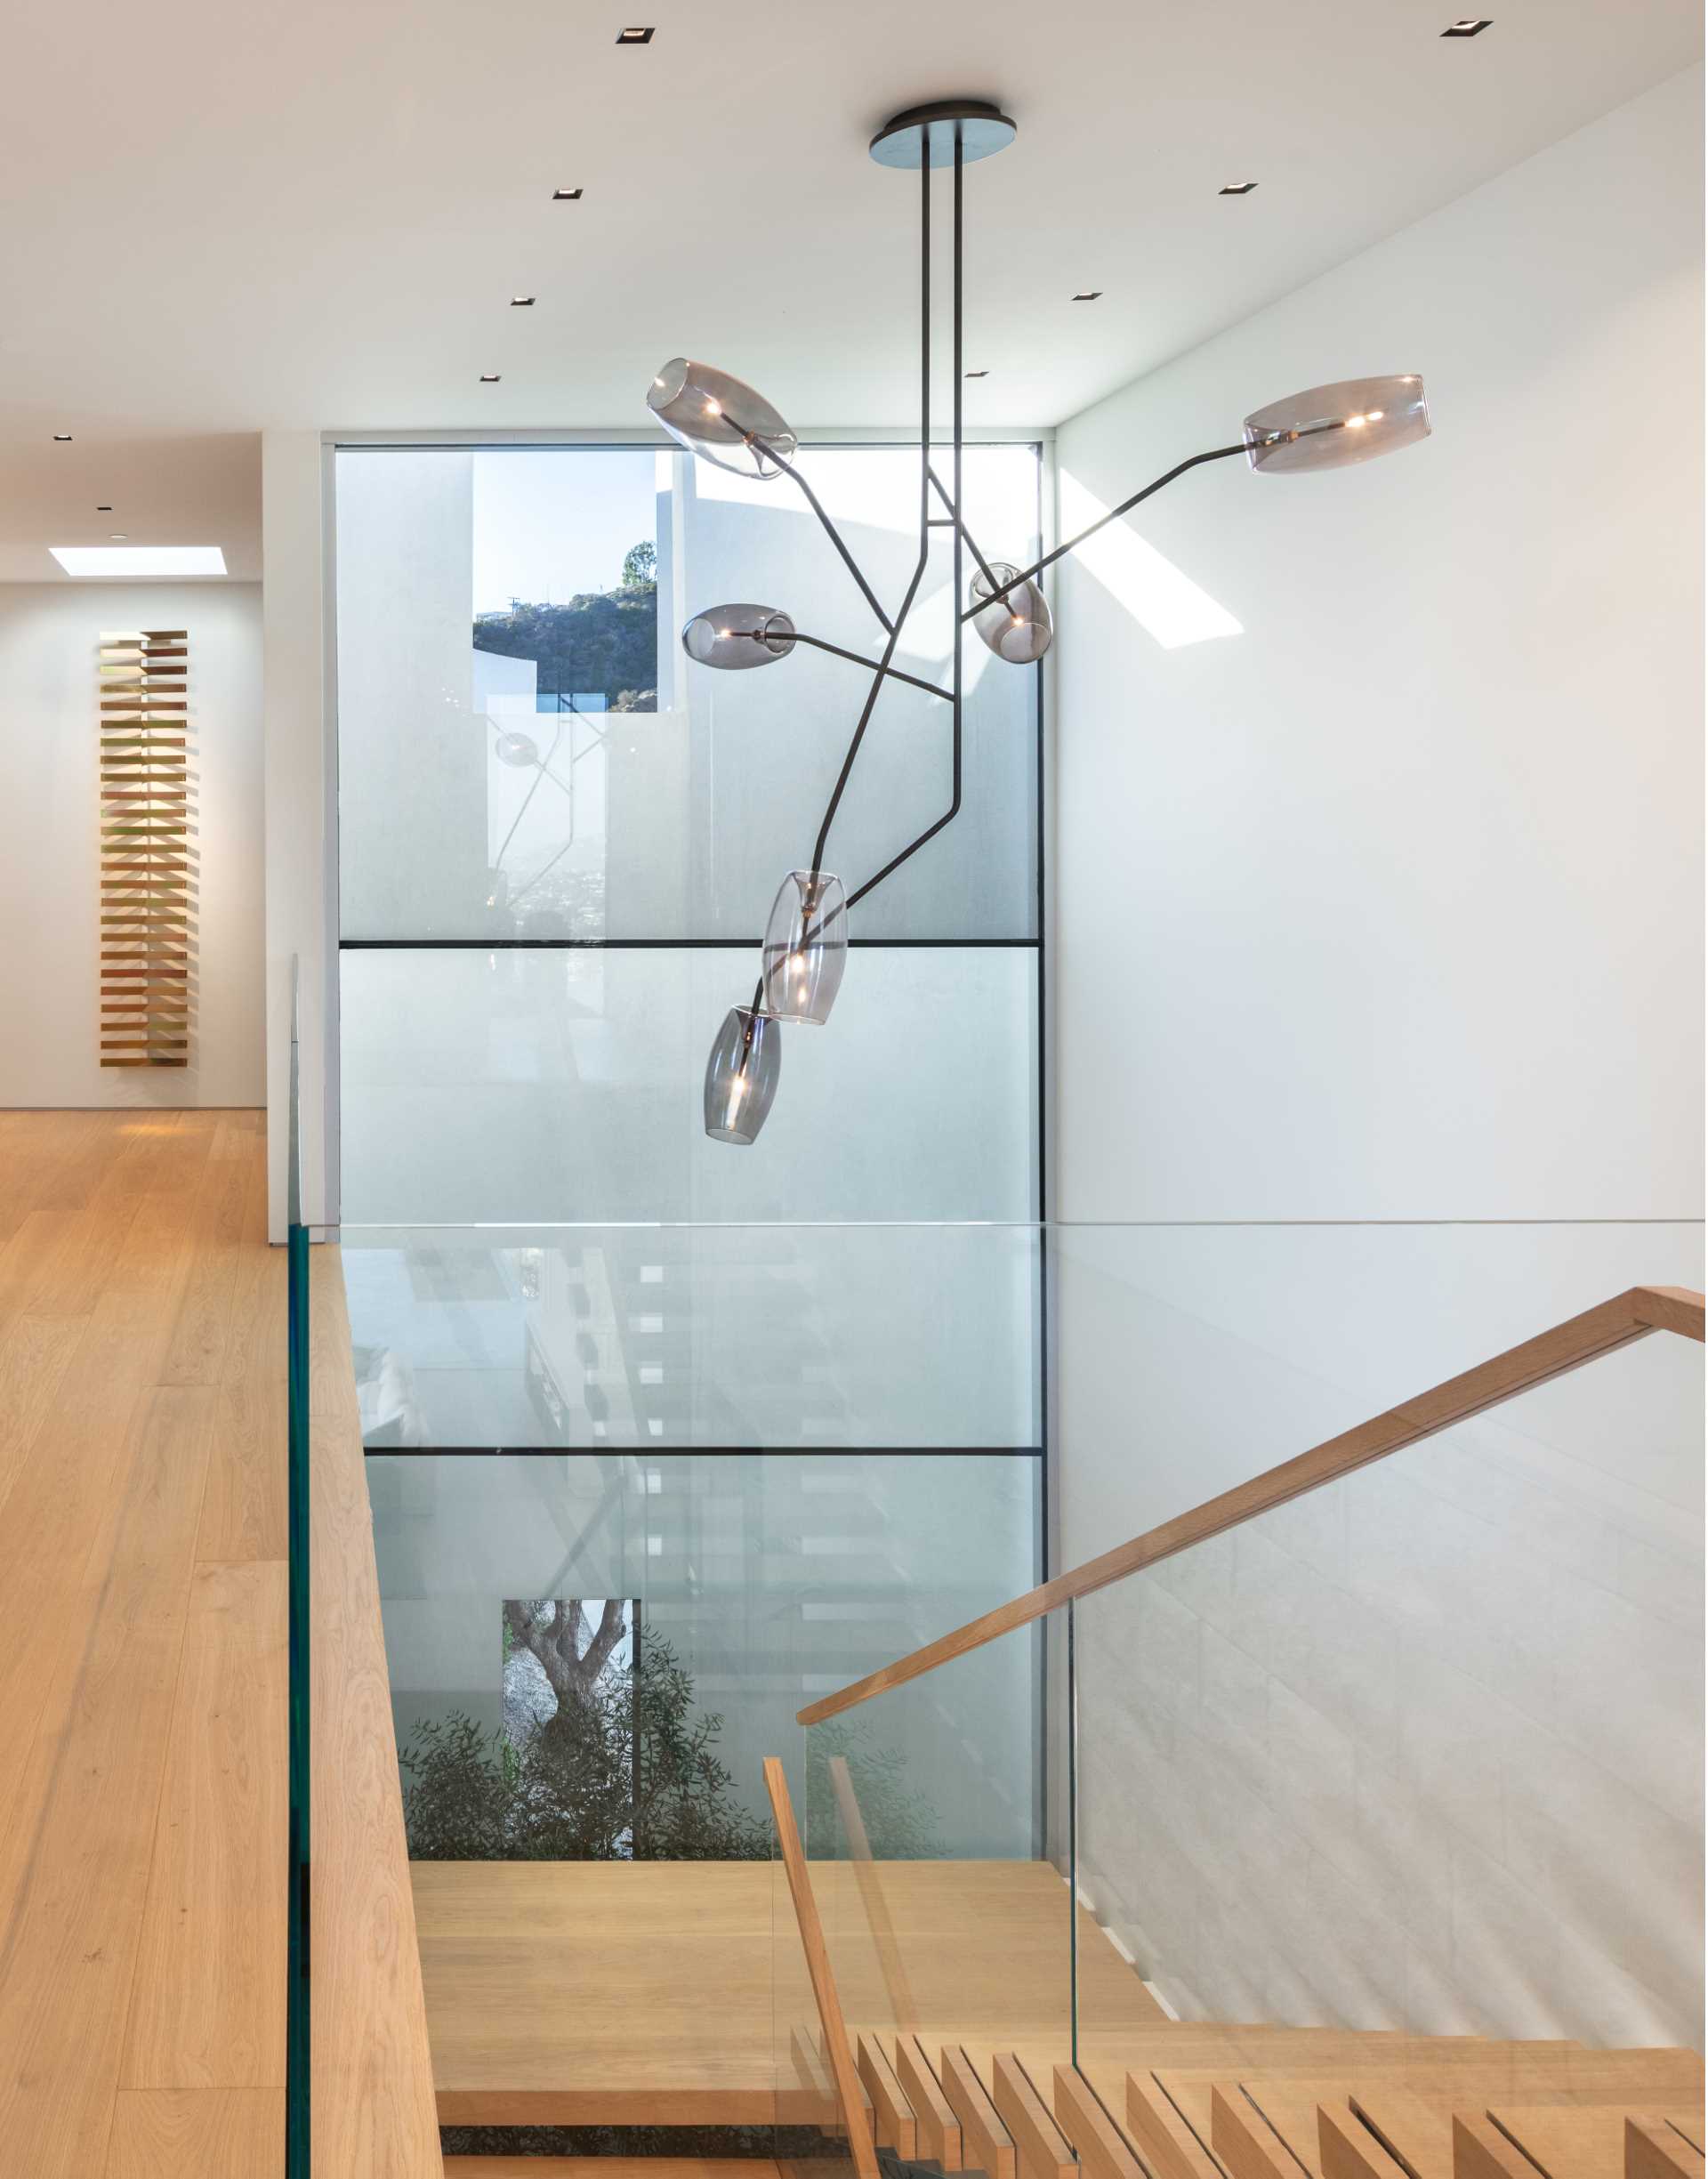 Stairs with a glass and wood handrail connect the various levels of this modern home, while a sculptural light fixture adds interest to the space.